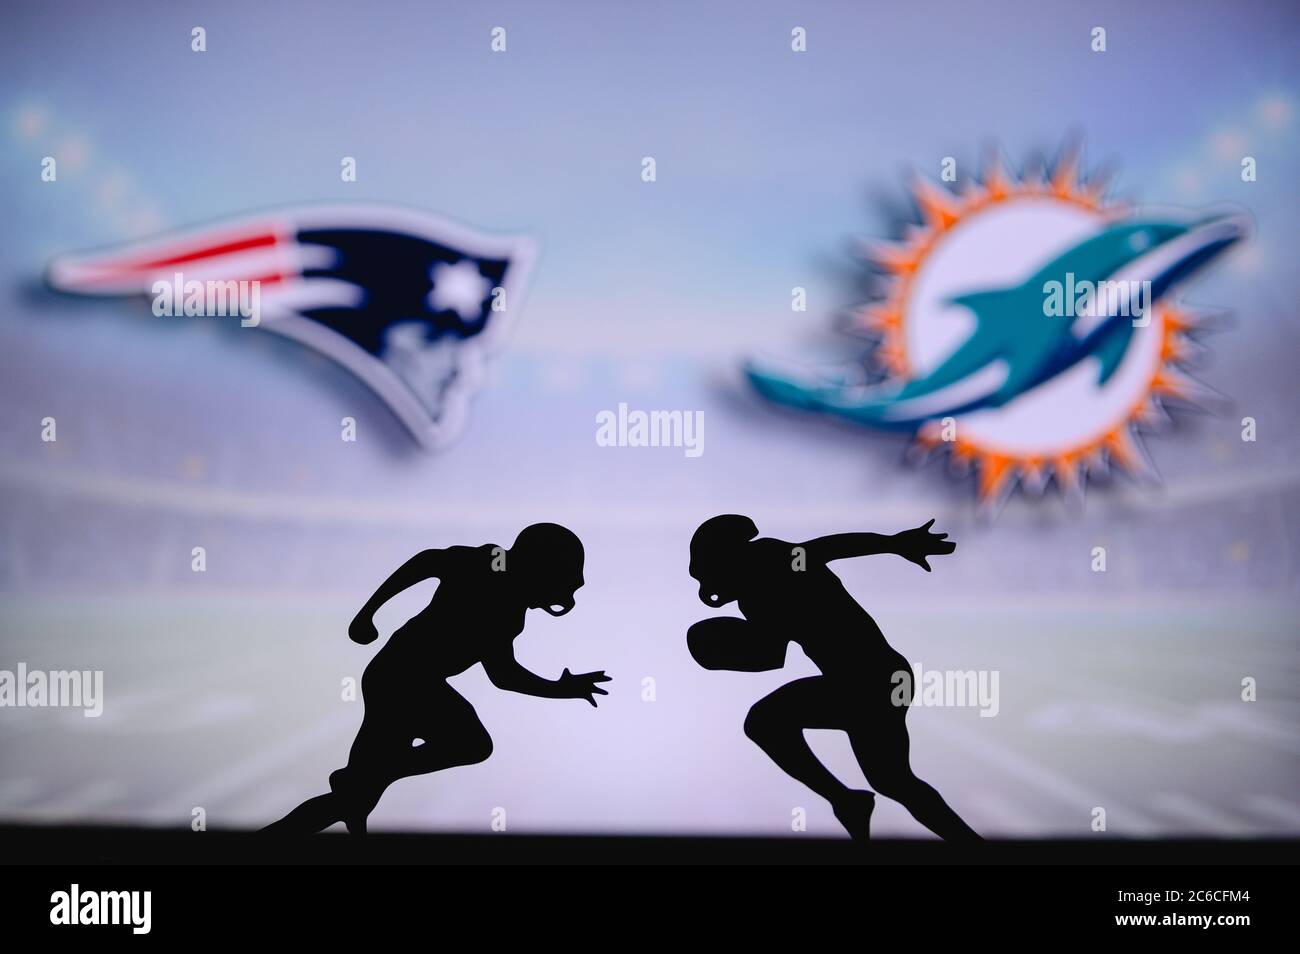 New England Patriots vs. Miami Dolphins. NFL match poster. Two american  football players silhouette facing each other on the field. Clubs logo in  back Stock Photo - Alamy